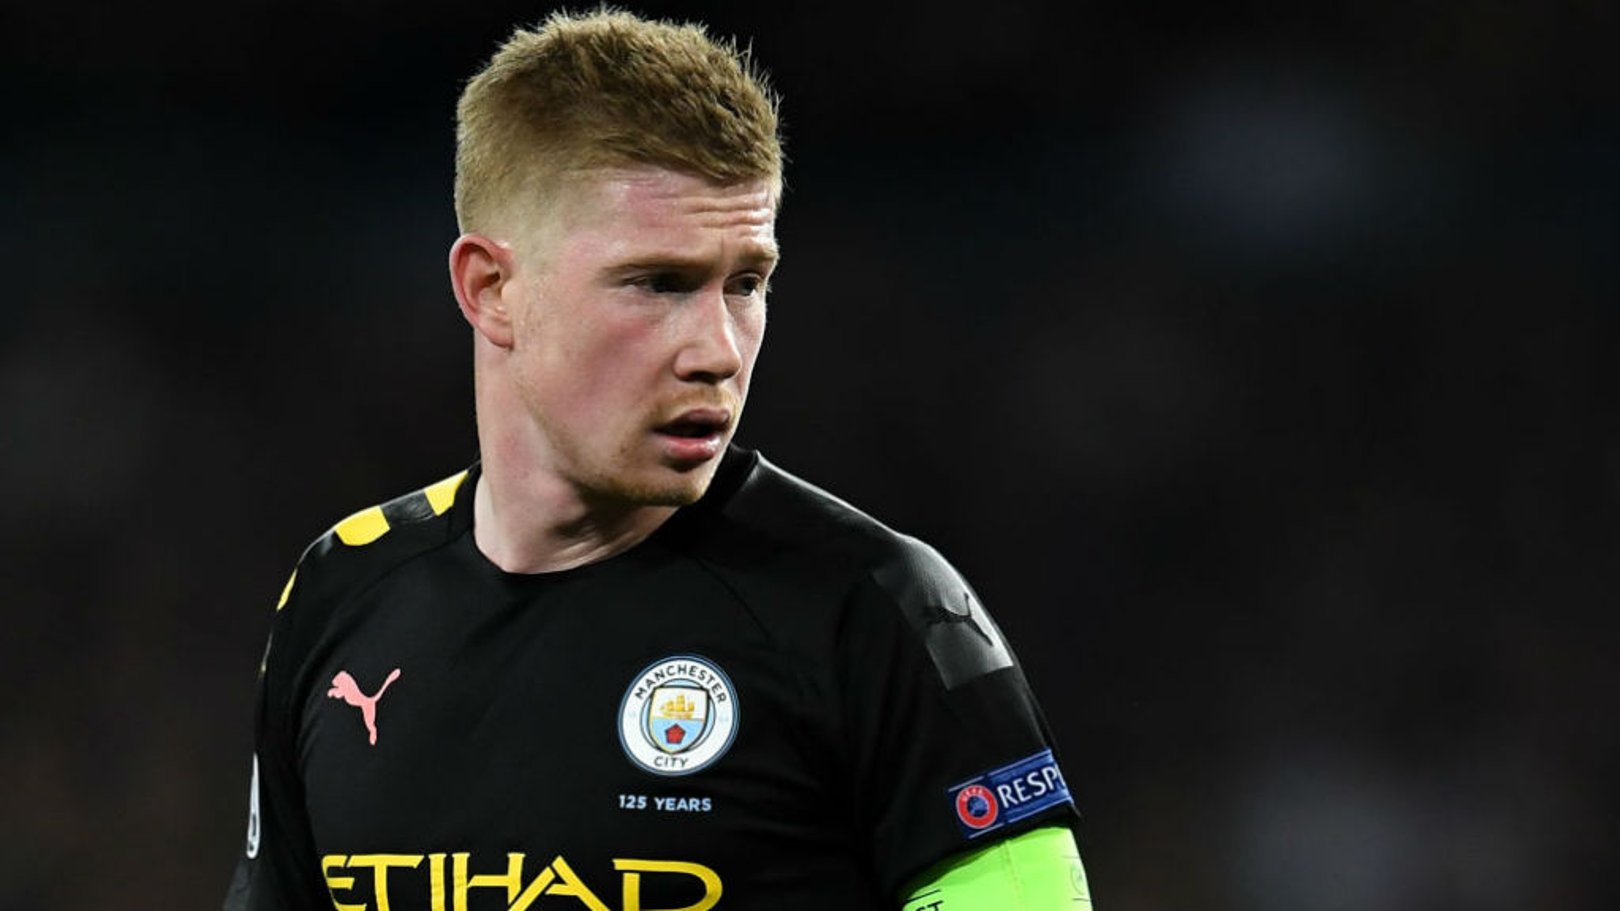 De Bruyne plays part in COVID-19 Relief fund-raising drive